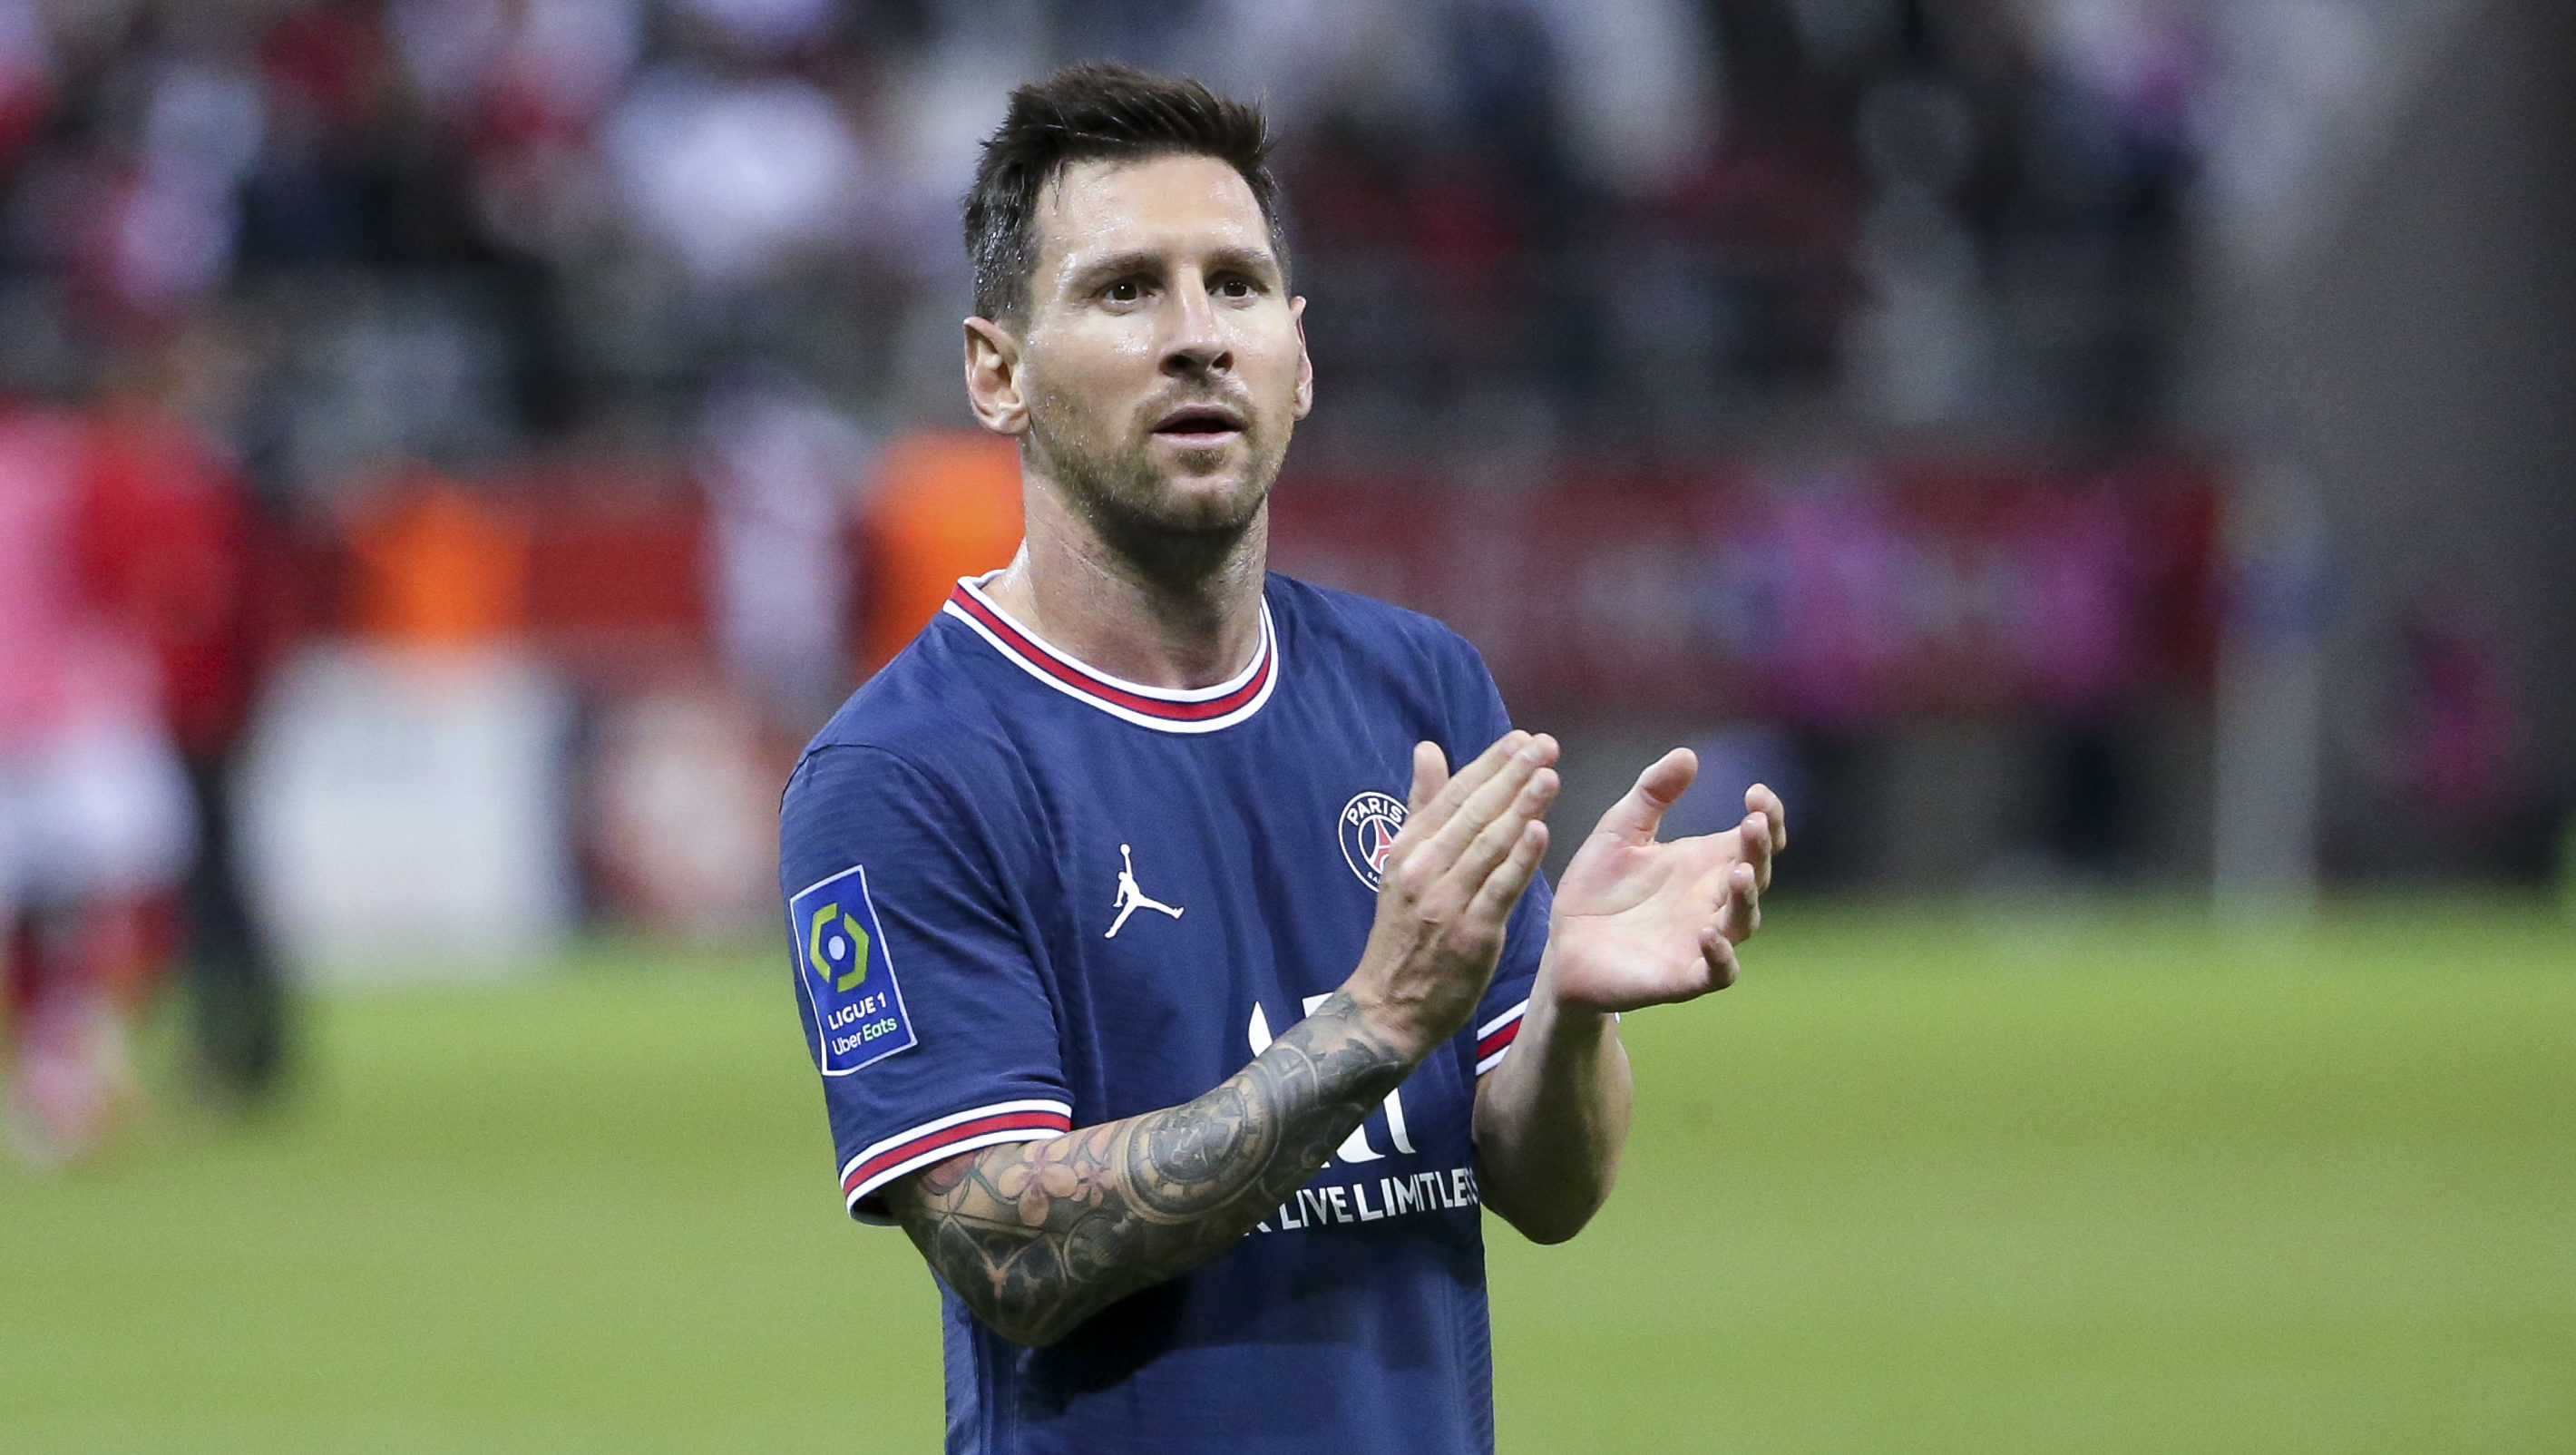 Lionel Messi: The captain of the Argentina national team | SportzPoint.com